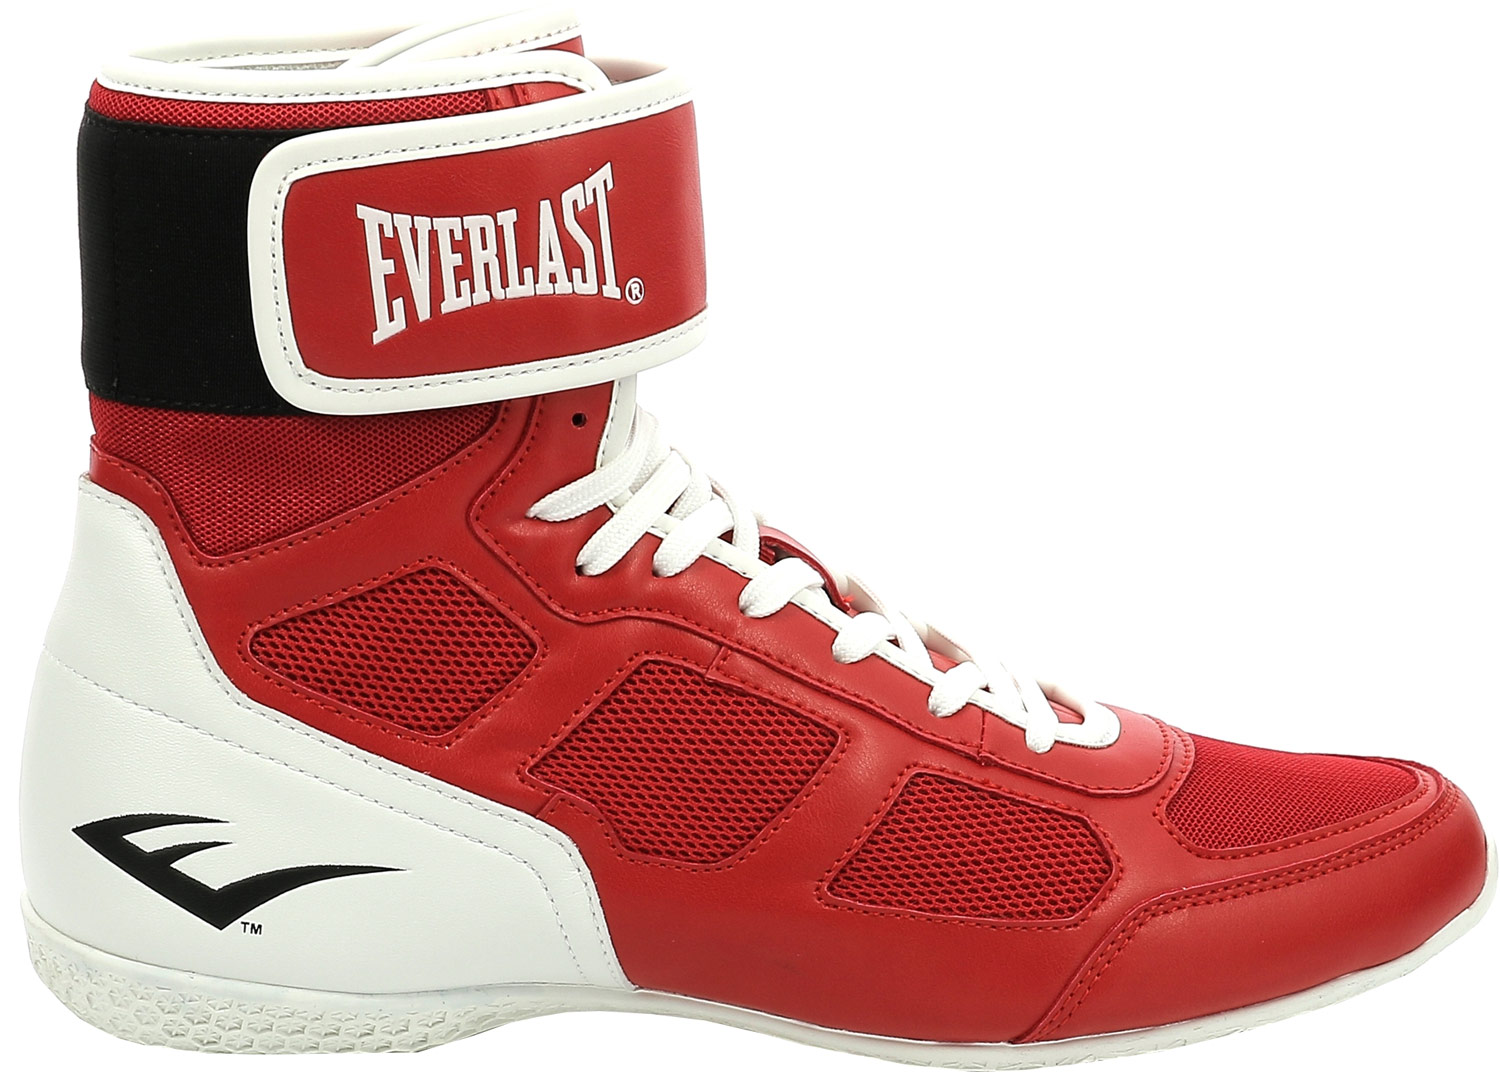 Boxing shoes